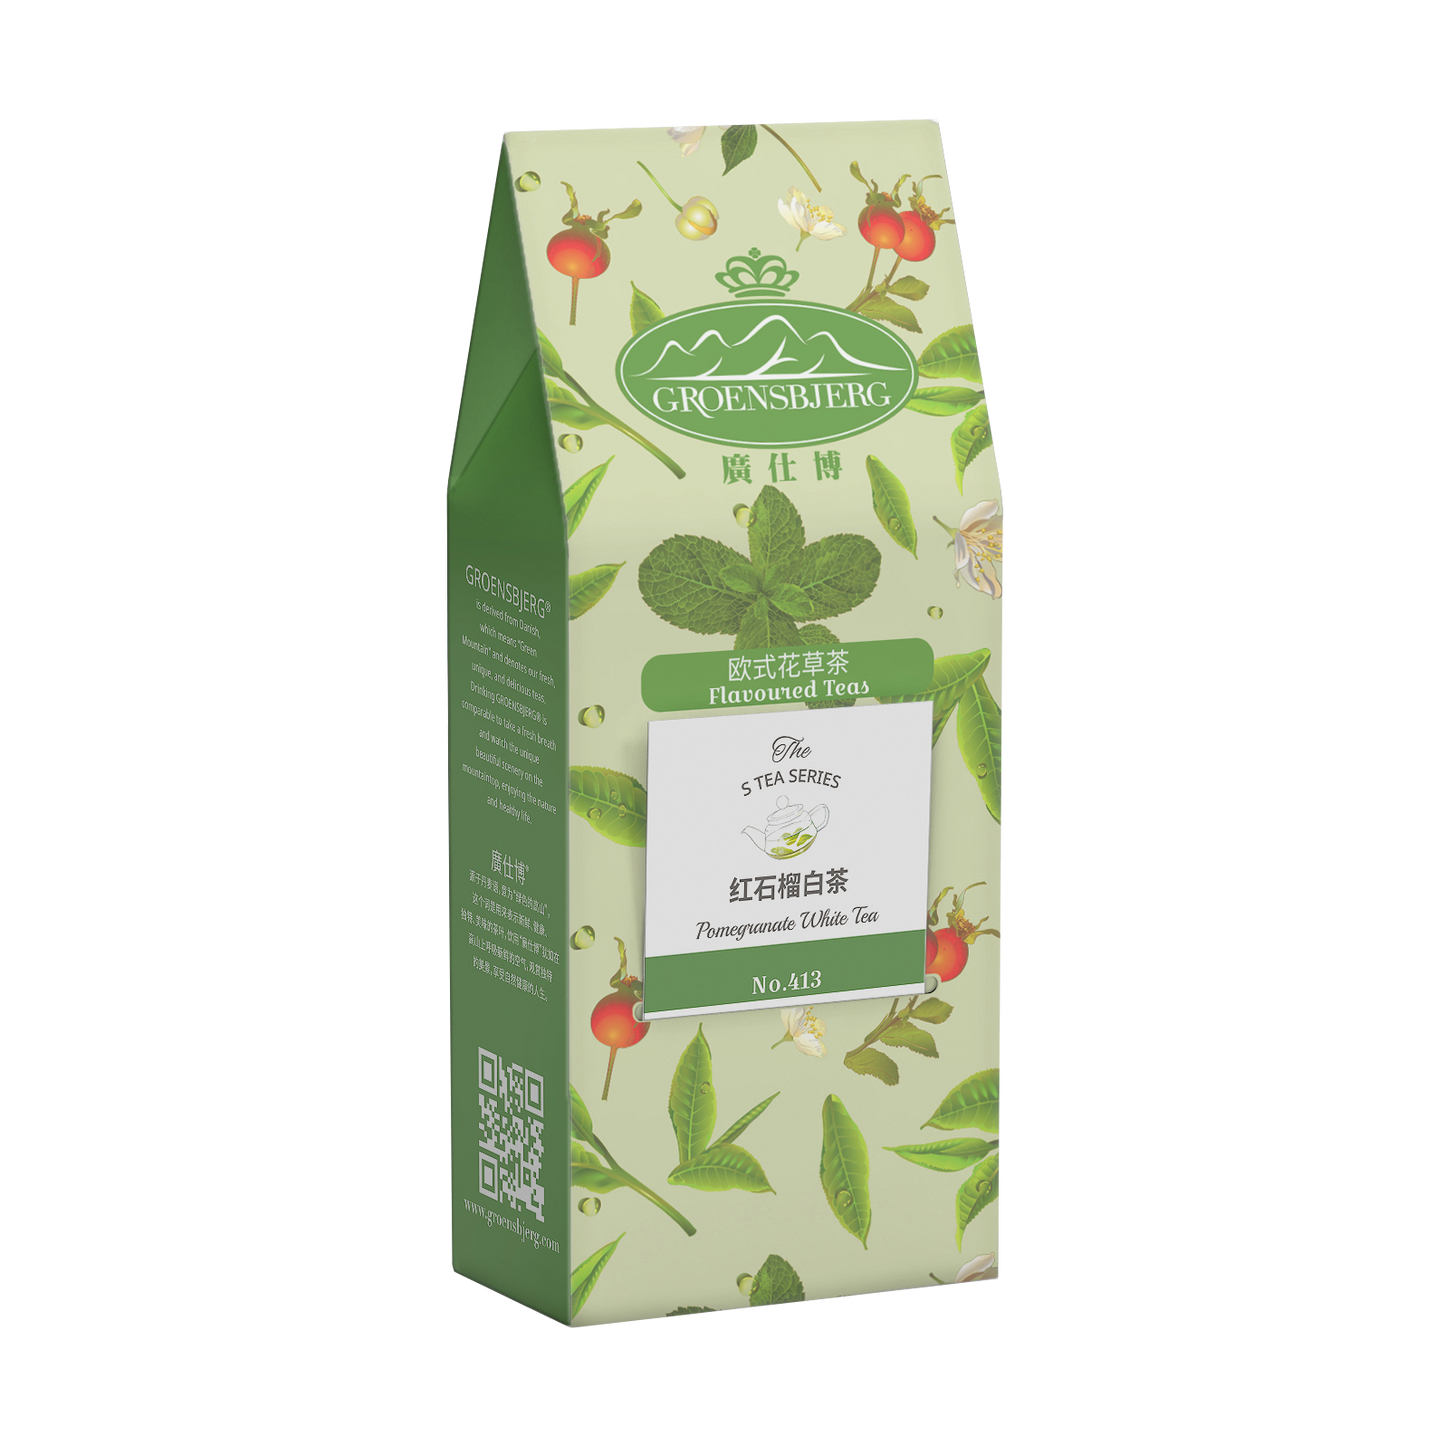 Pomegranate White Tea 37.5g Pouch Box with Teabags